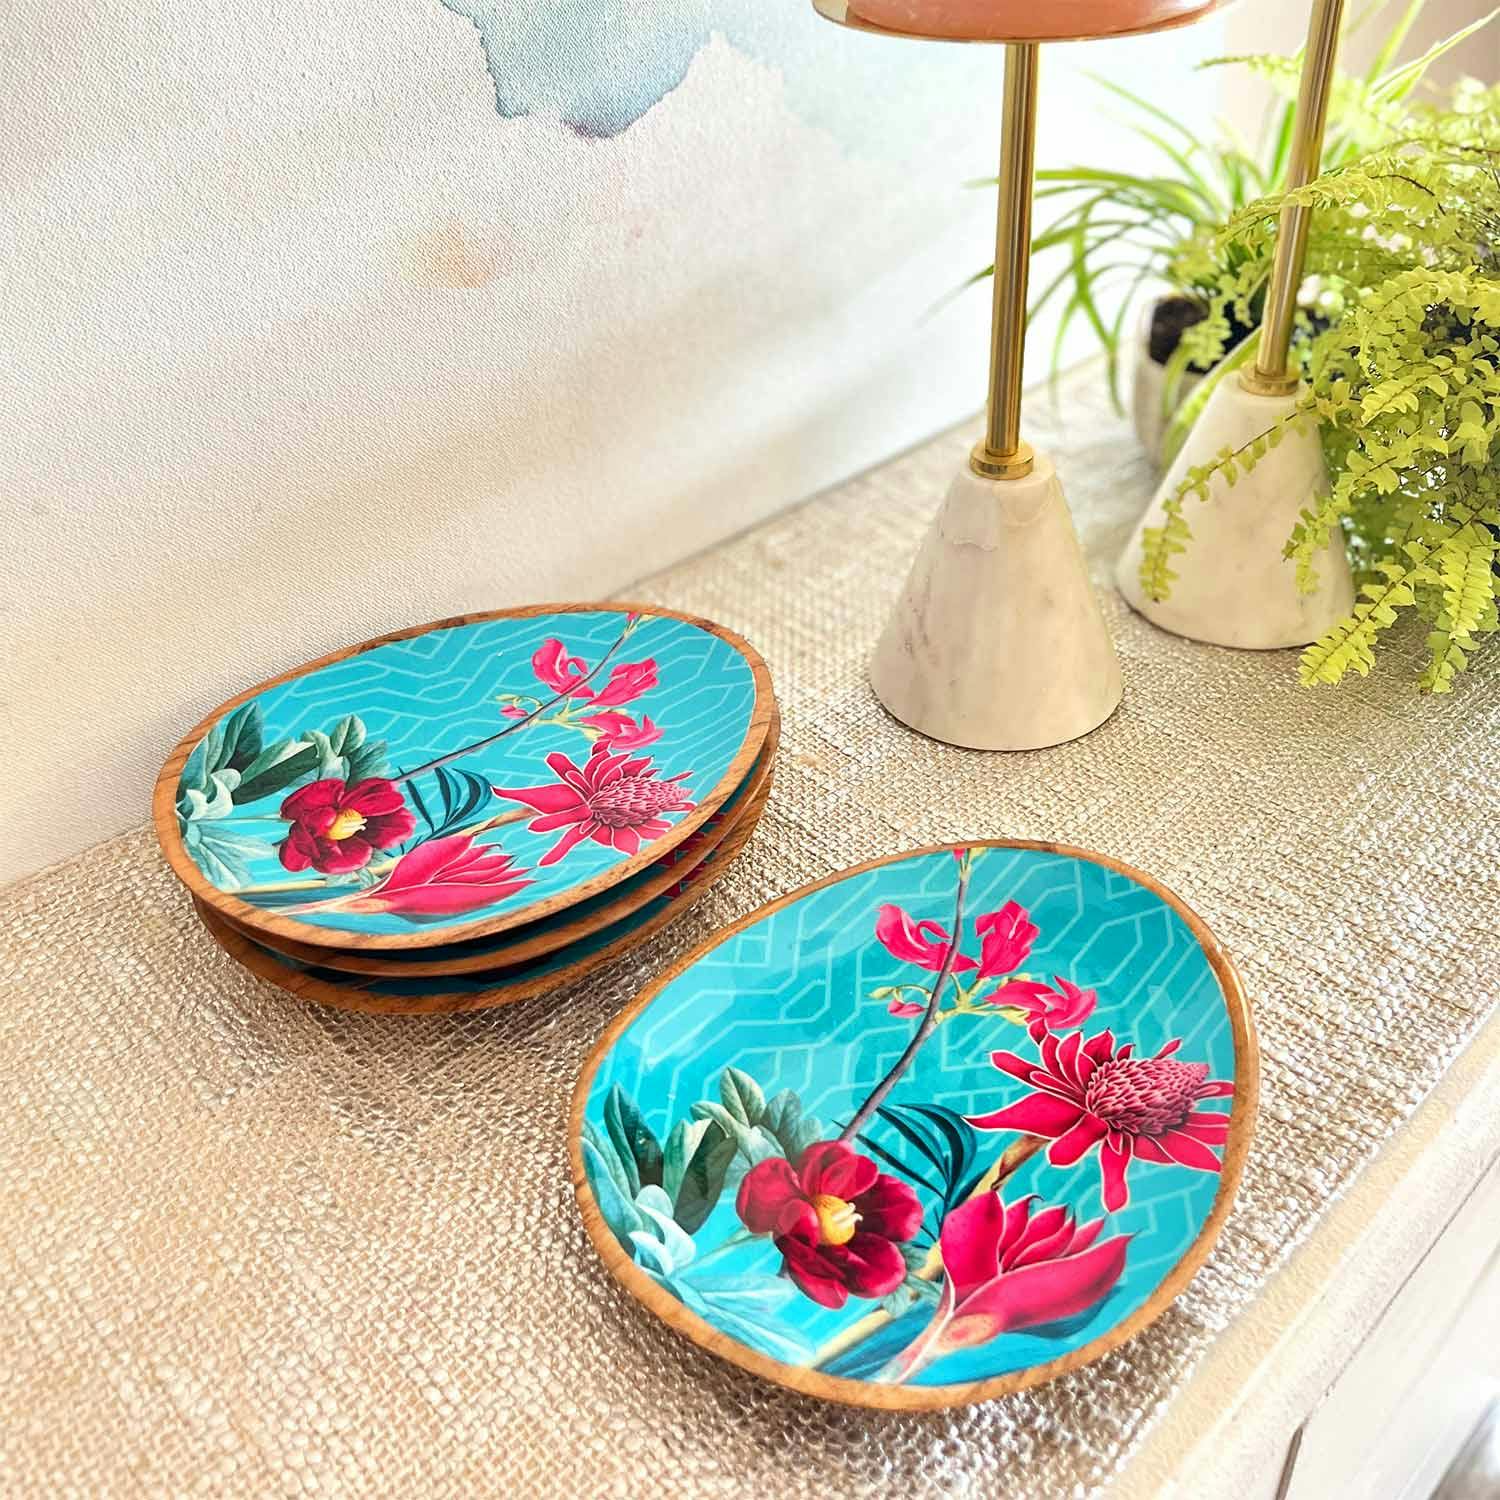 Mini Oval Plates, Set of 4 - Chilean Deco, a product by Faaya Gifting